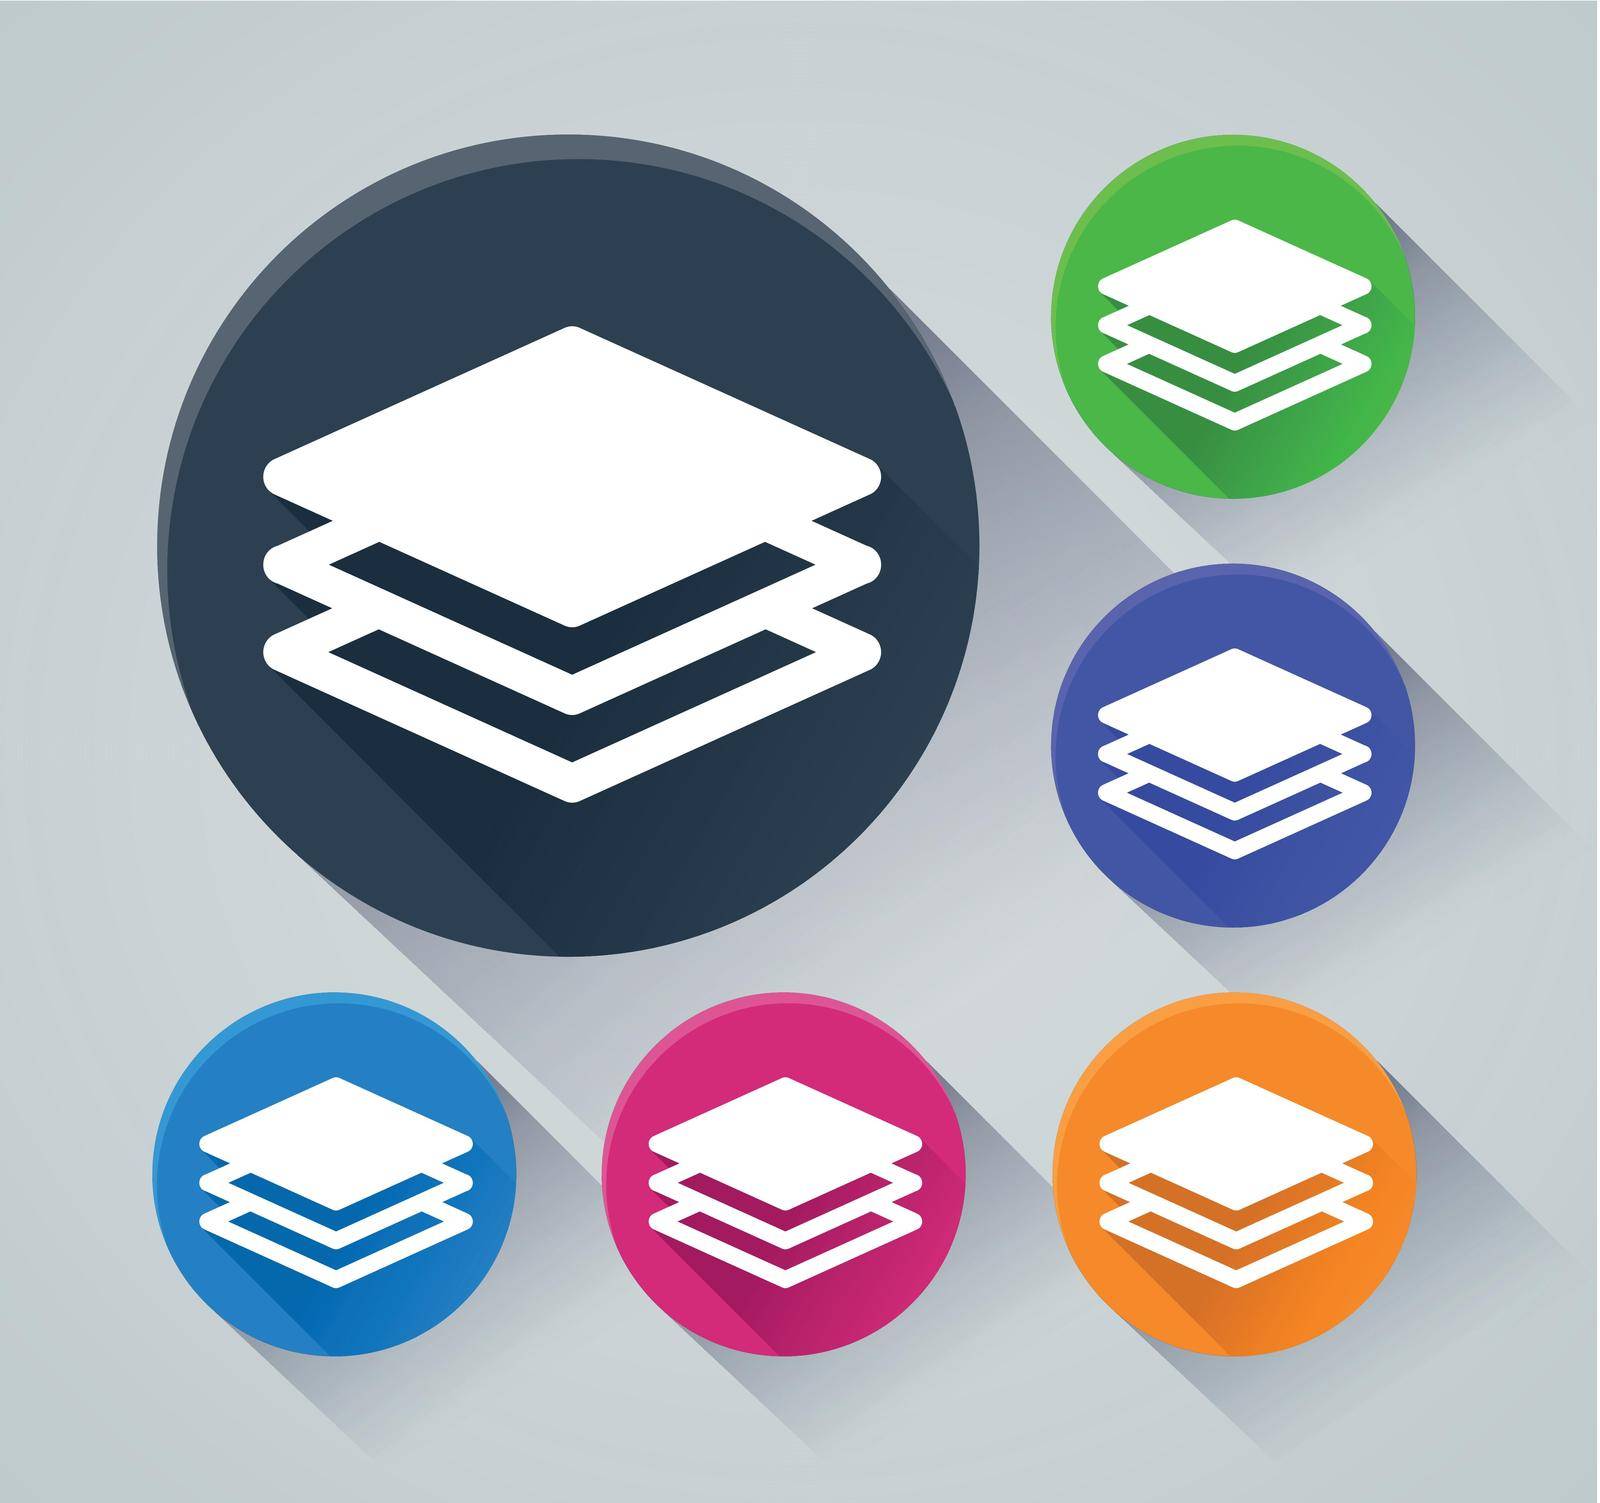 layers circle icons with shadow by Francois_Poirier